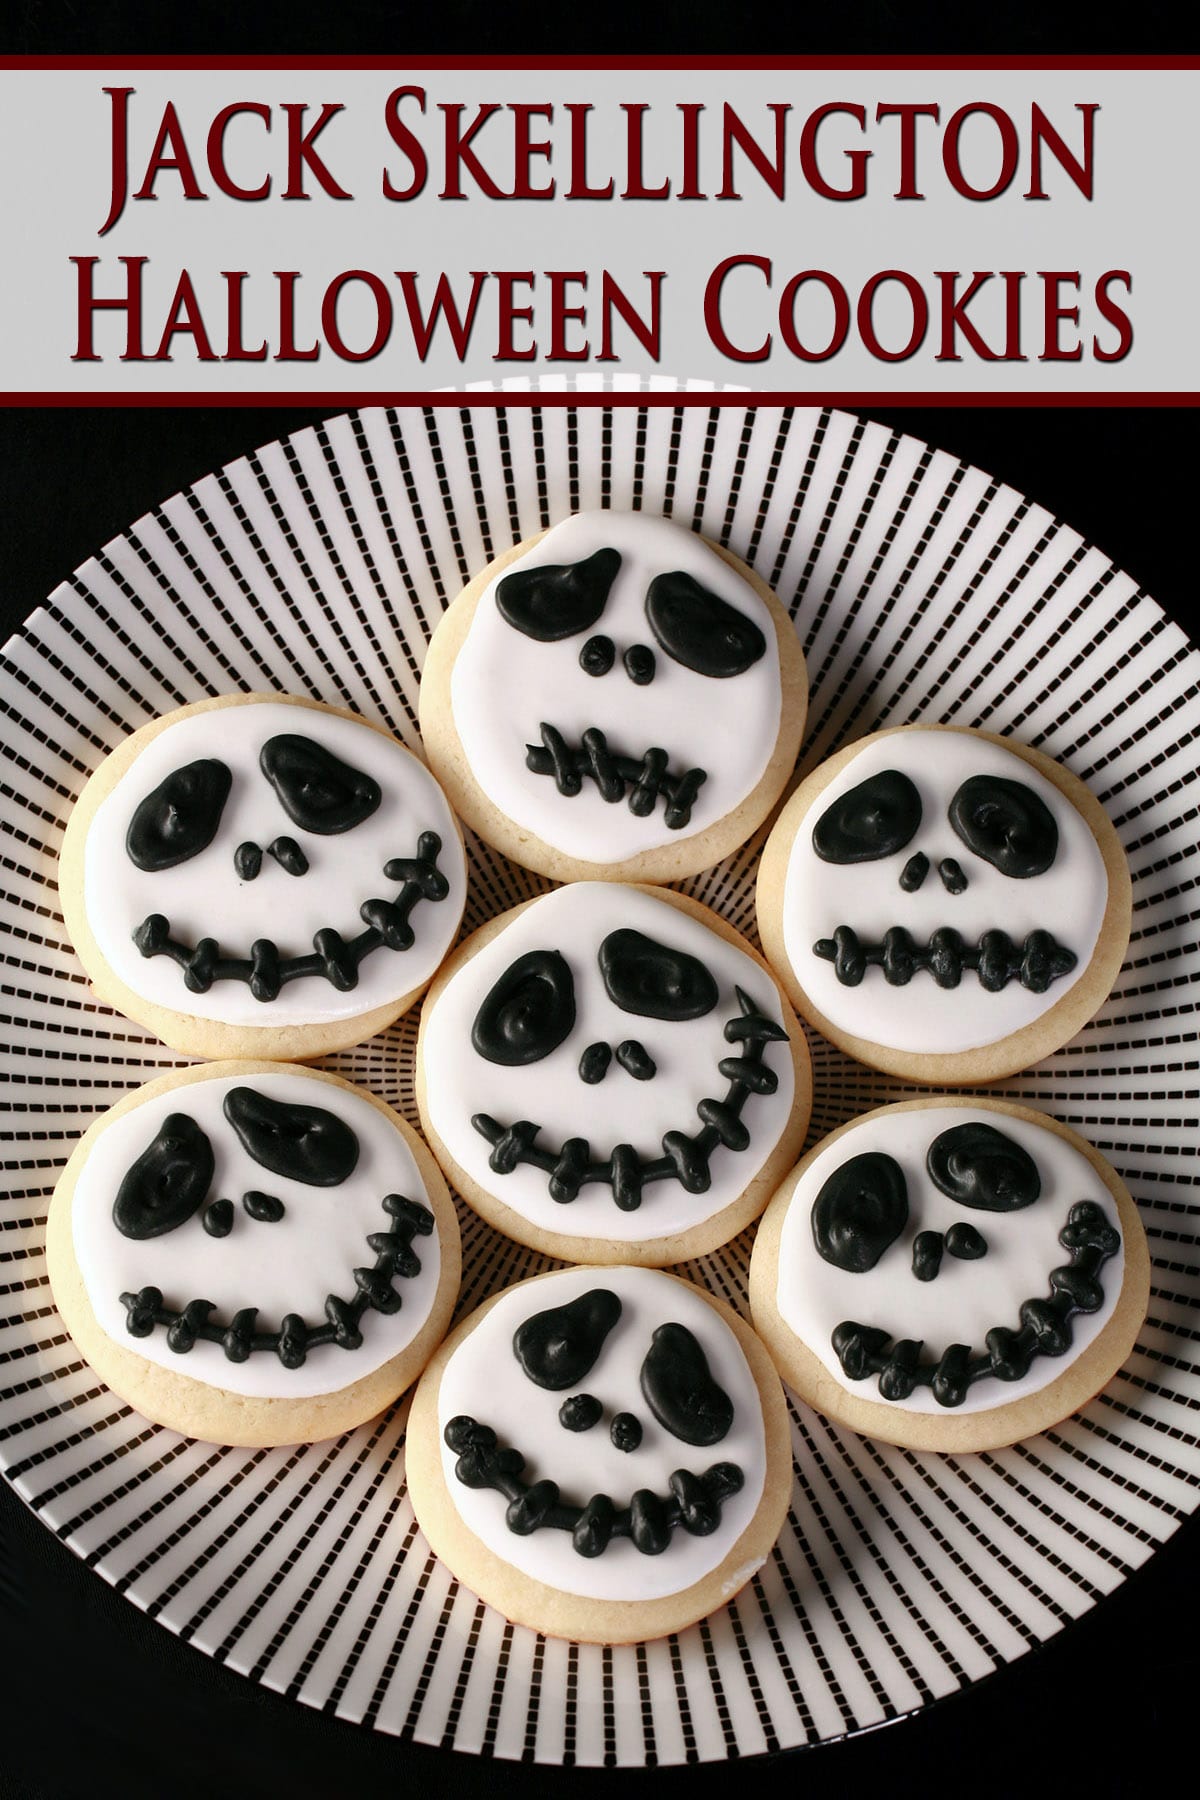 A plate of round white cookies with skeleton faces piped on them - Jack Skellington cookies.